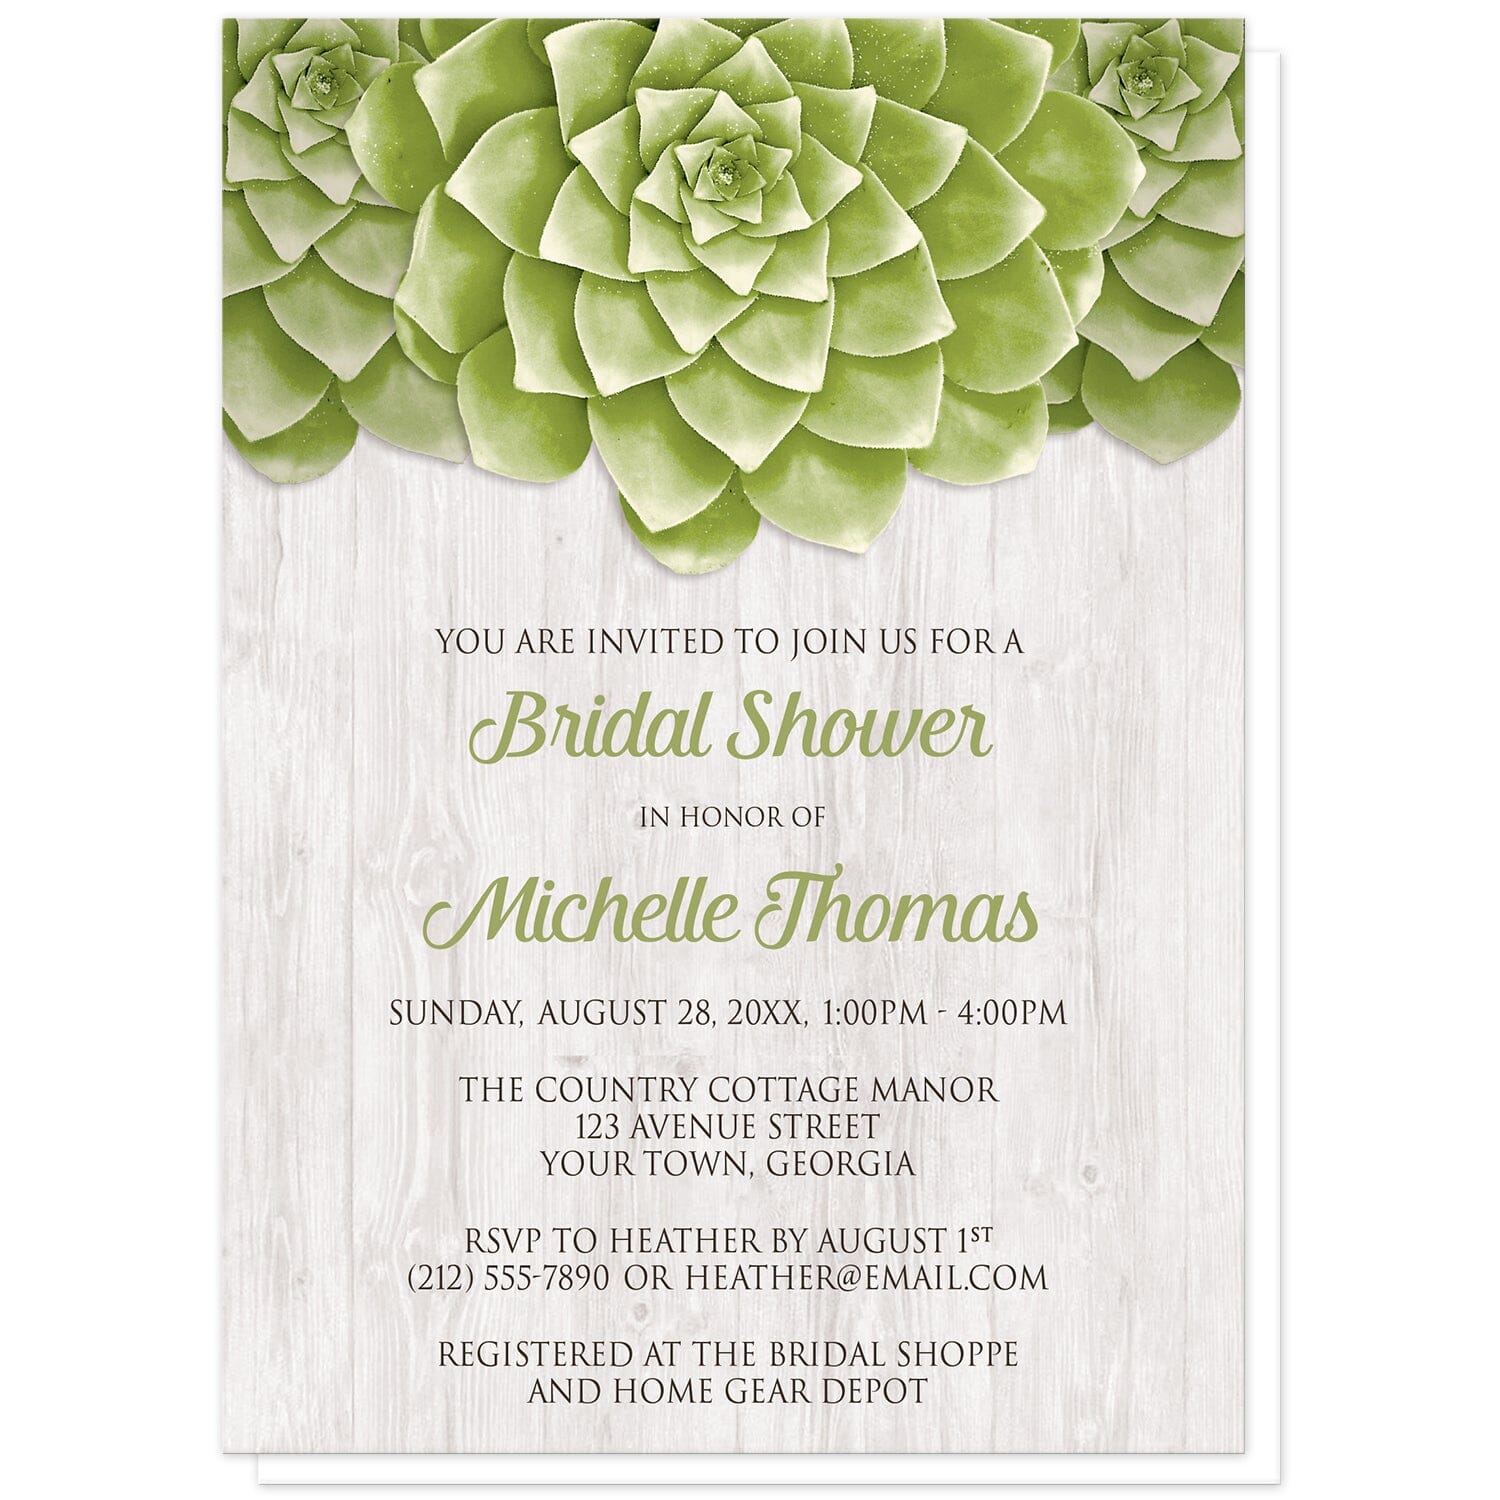 Succulent Whitewashed Wood Bridal Shower Invitations at Artistically Invited.  Cool and fresh succulent whitewashed wood bridal shower invitations with three large green succulents along the top of the invitations over a rustic whitewashed wood background design. Your personalized bridal shower celebration details are custom printed in green and dark brown over the whitewashed wood background below the succulents. 